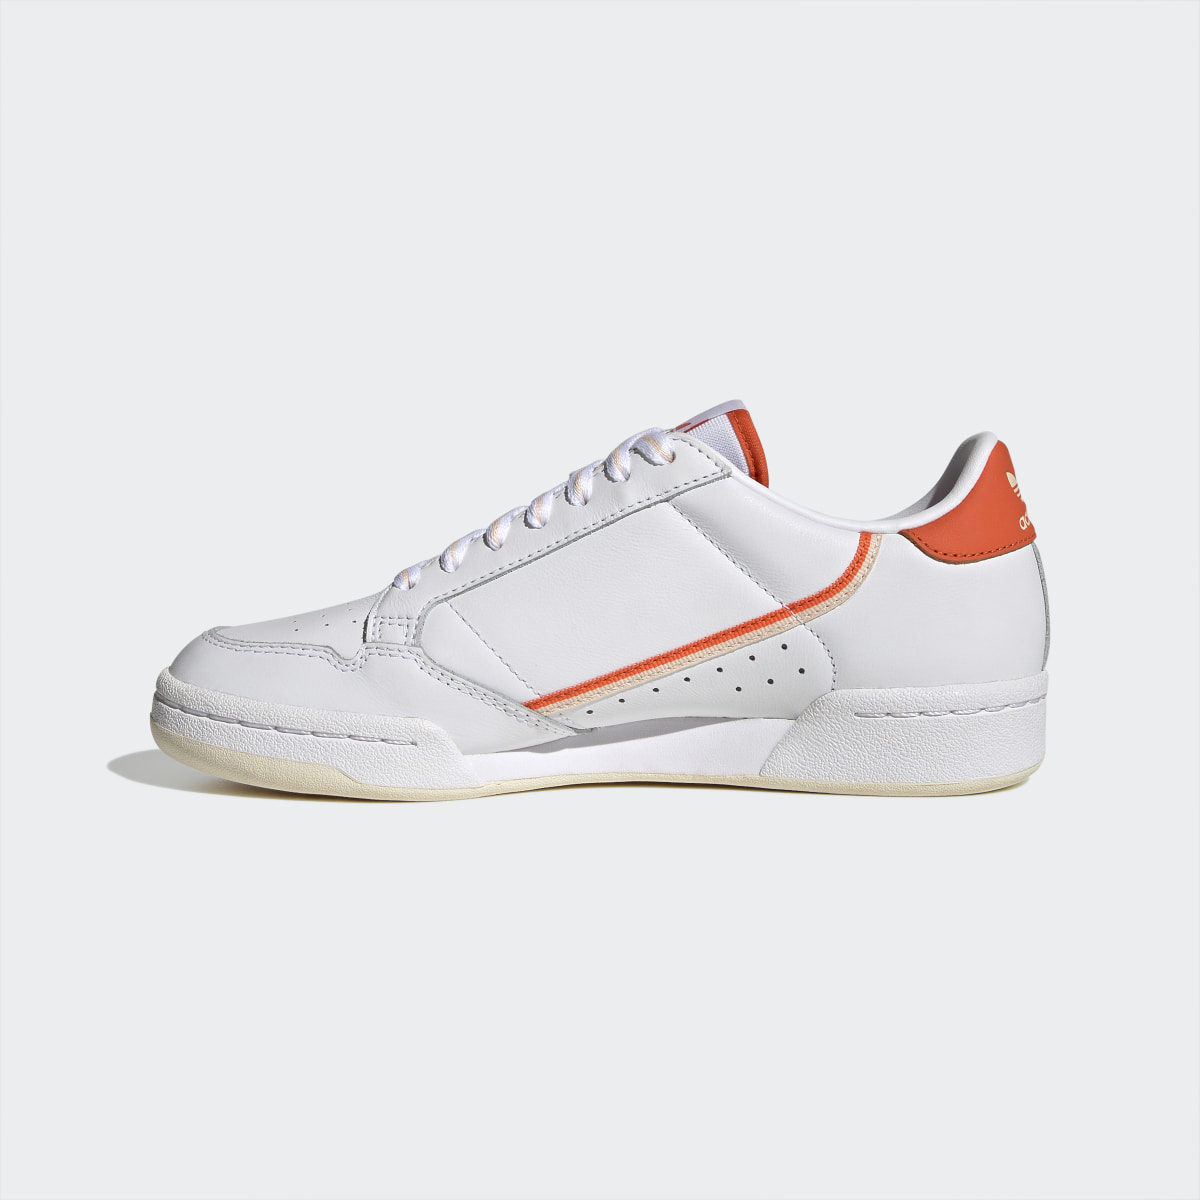 Adidas Continental 80 Shoes. 7